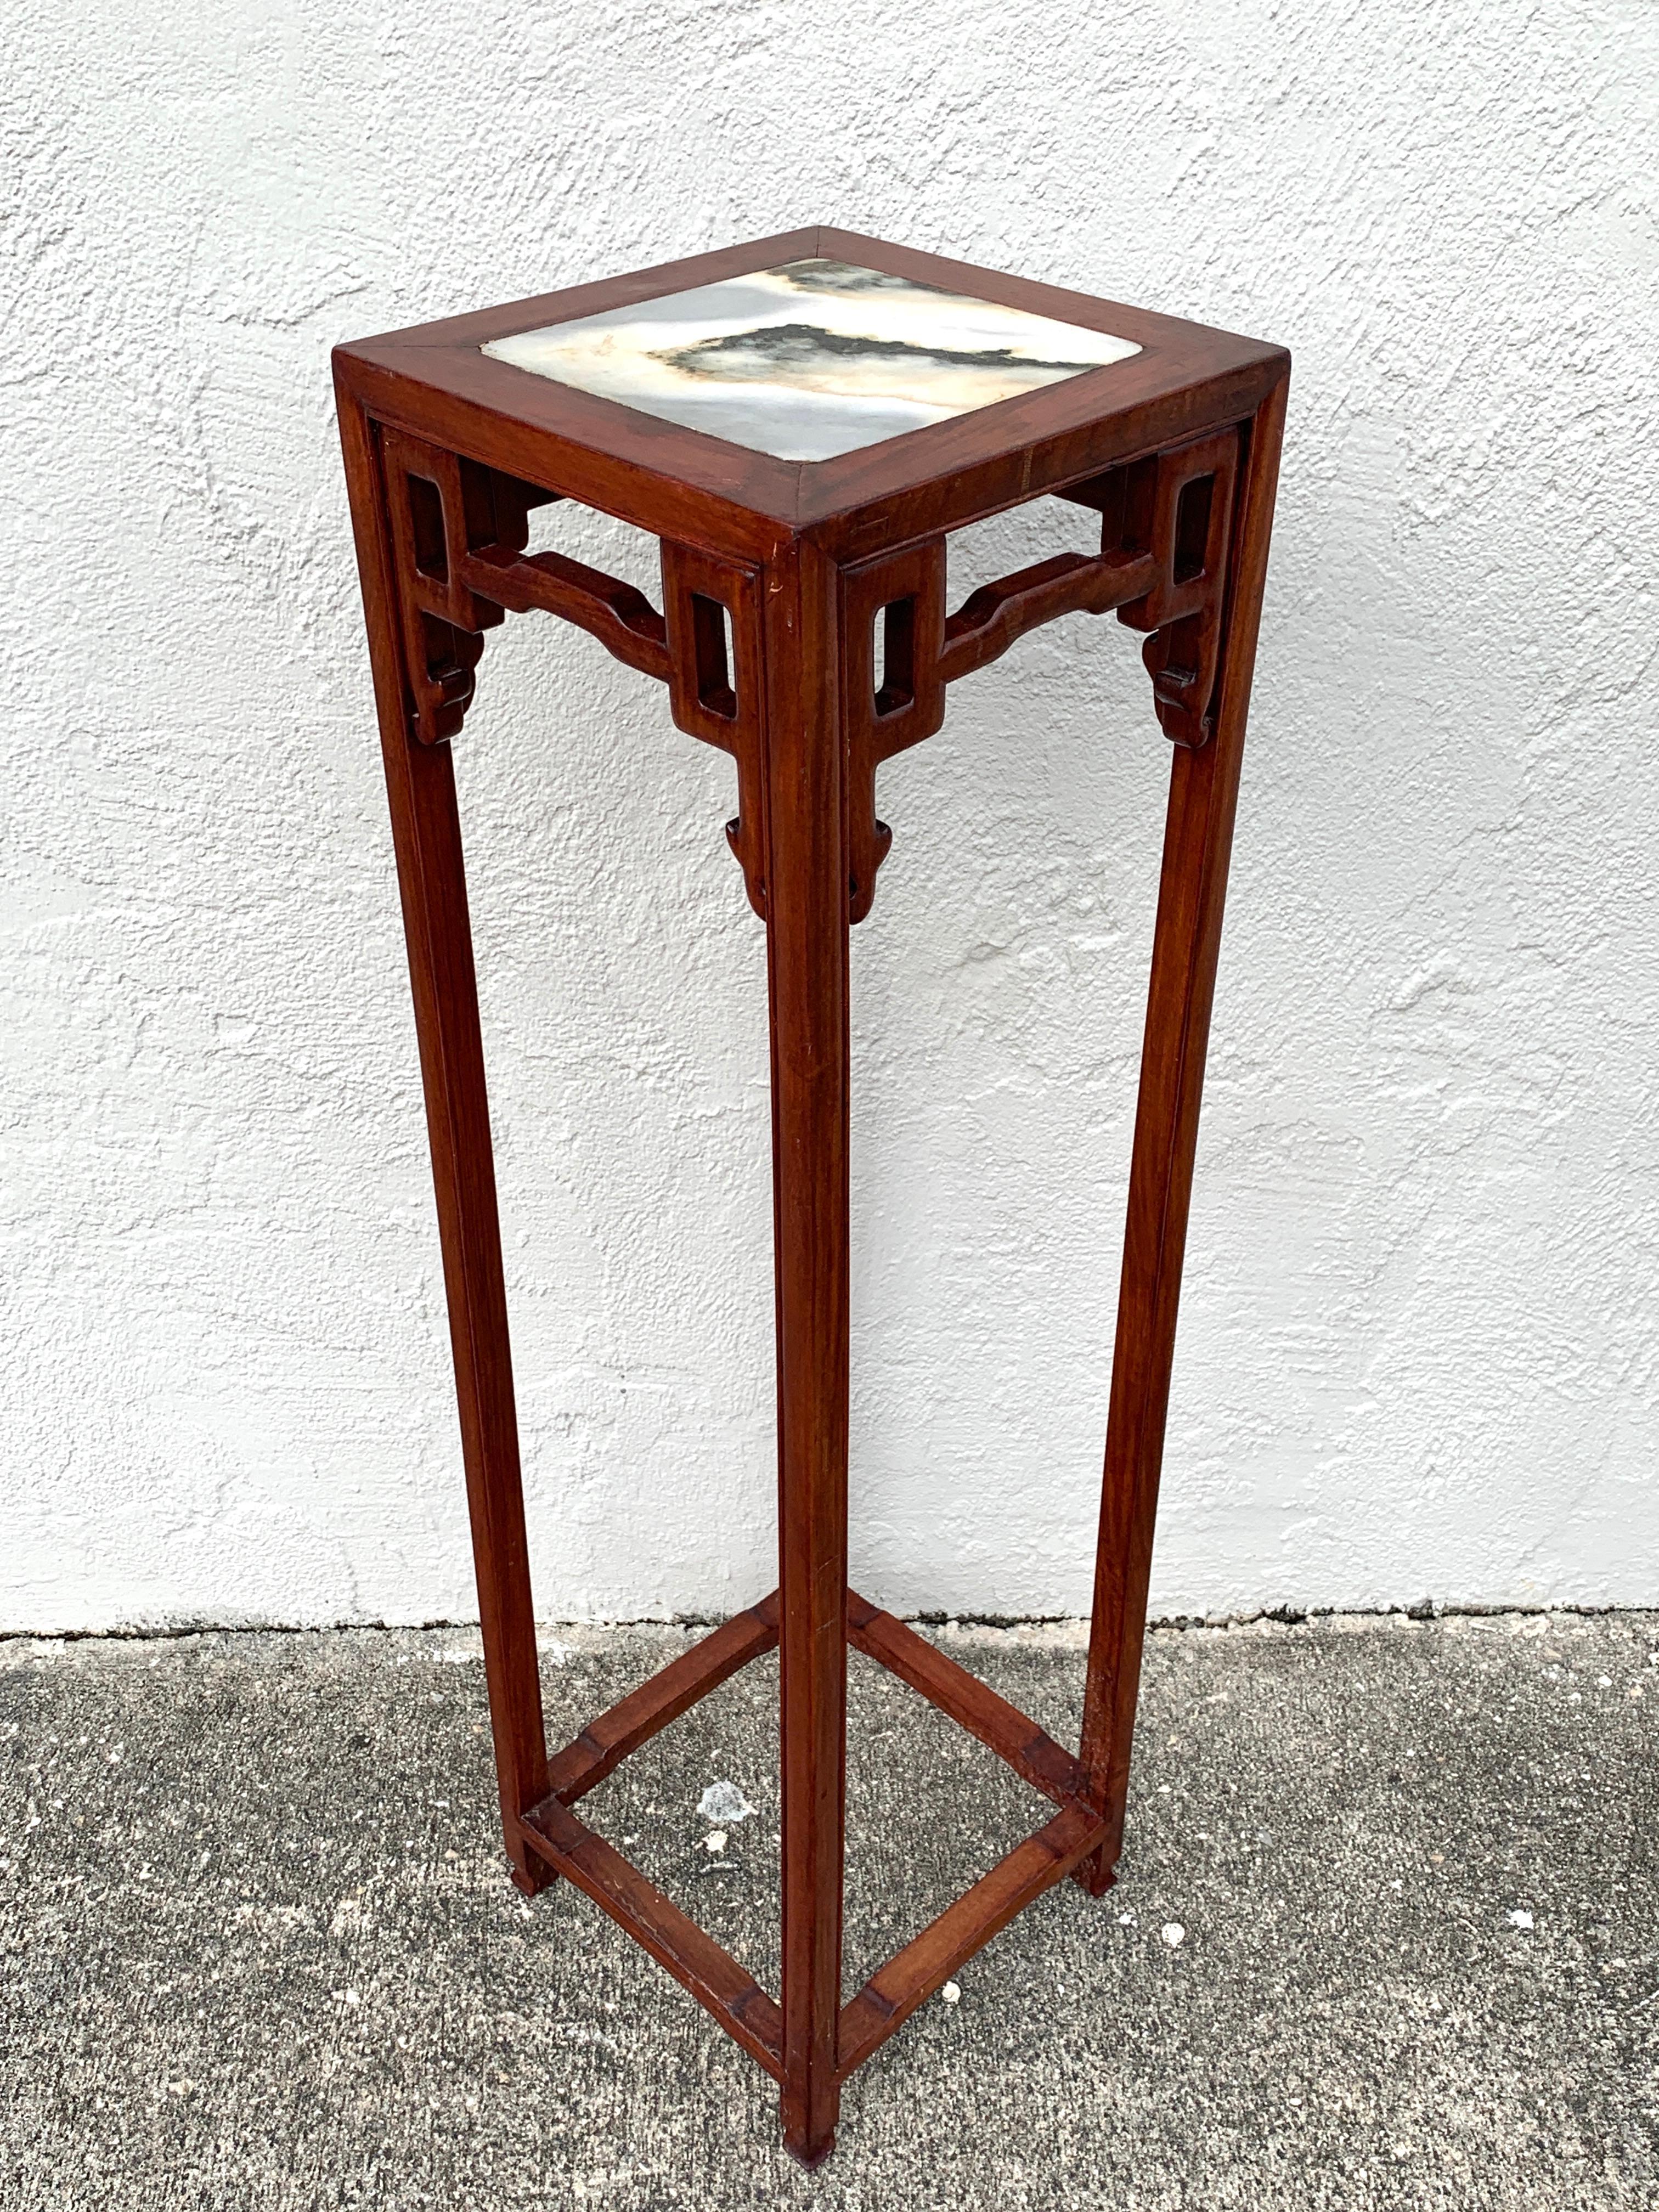 20th Century Pair of Chinese Export Hardwood and Marble Pedestals For Sale